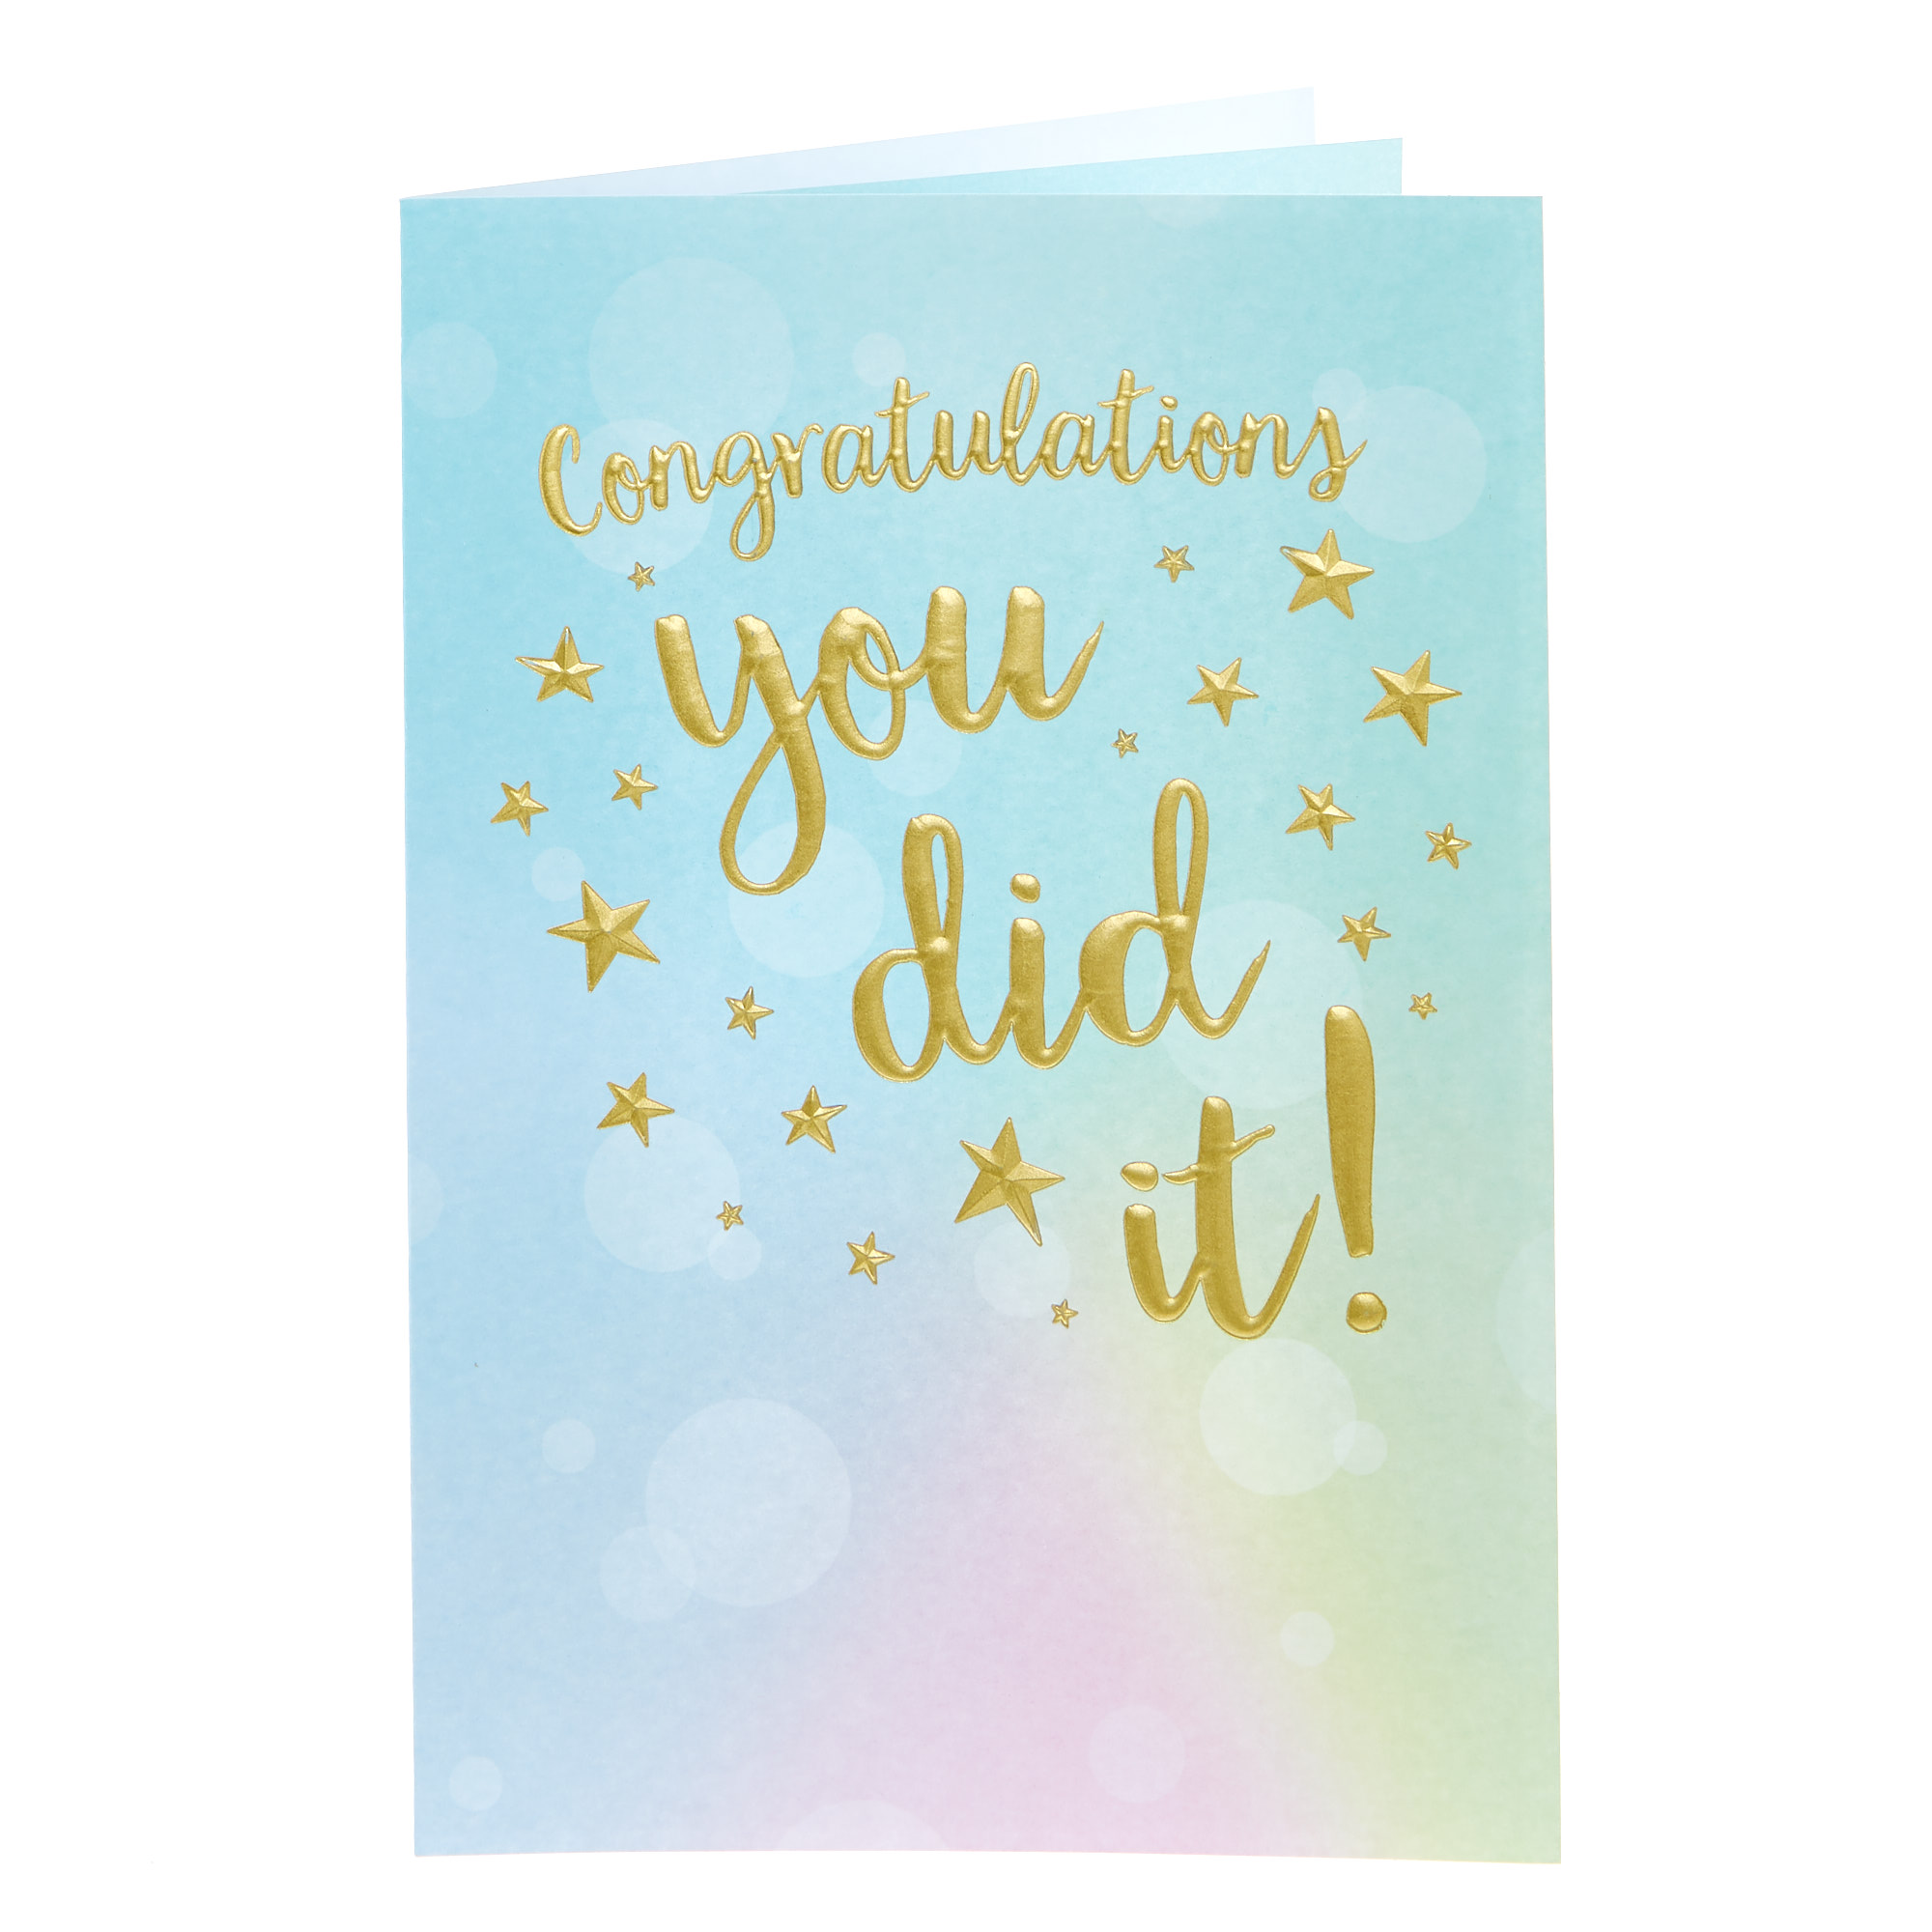 Congratulations Card - You Did It!